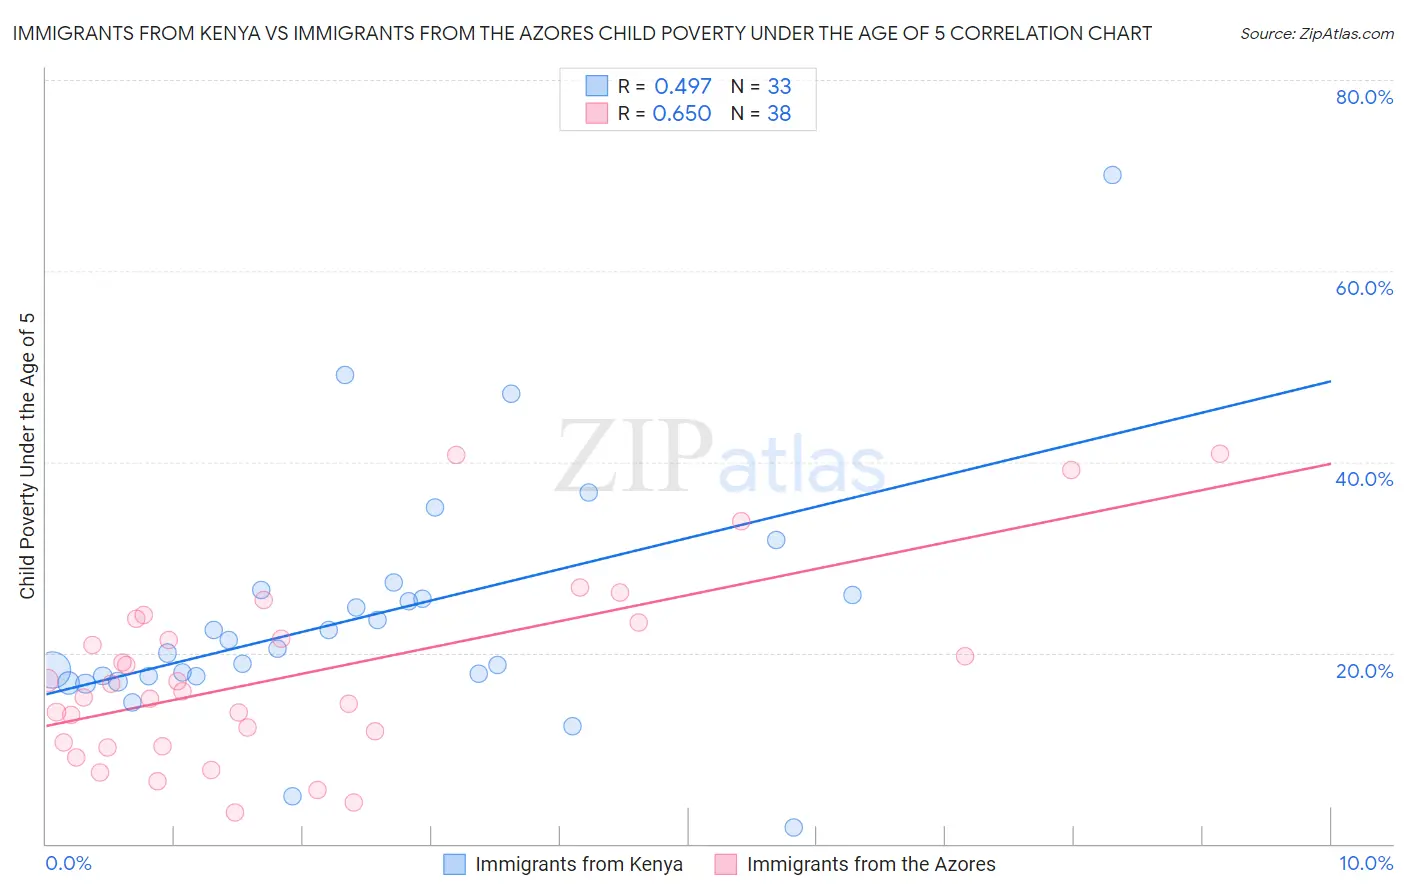 Immigrants from Kenya vs Immigrants from the Azores Child Poverty Under the Age of 5